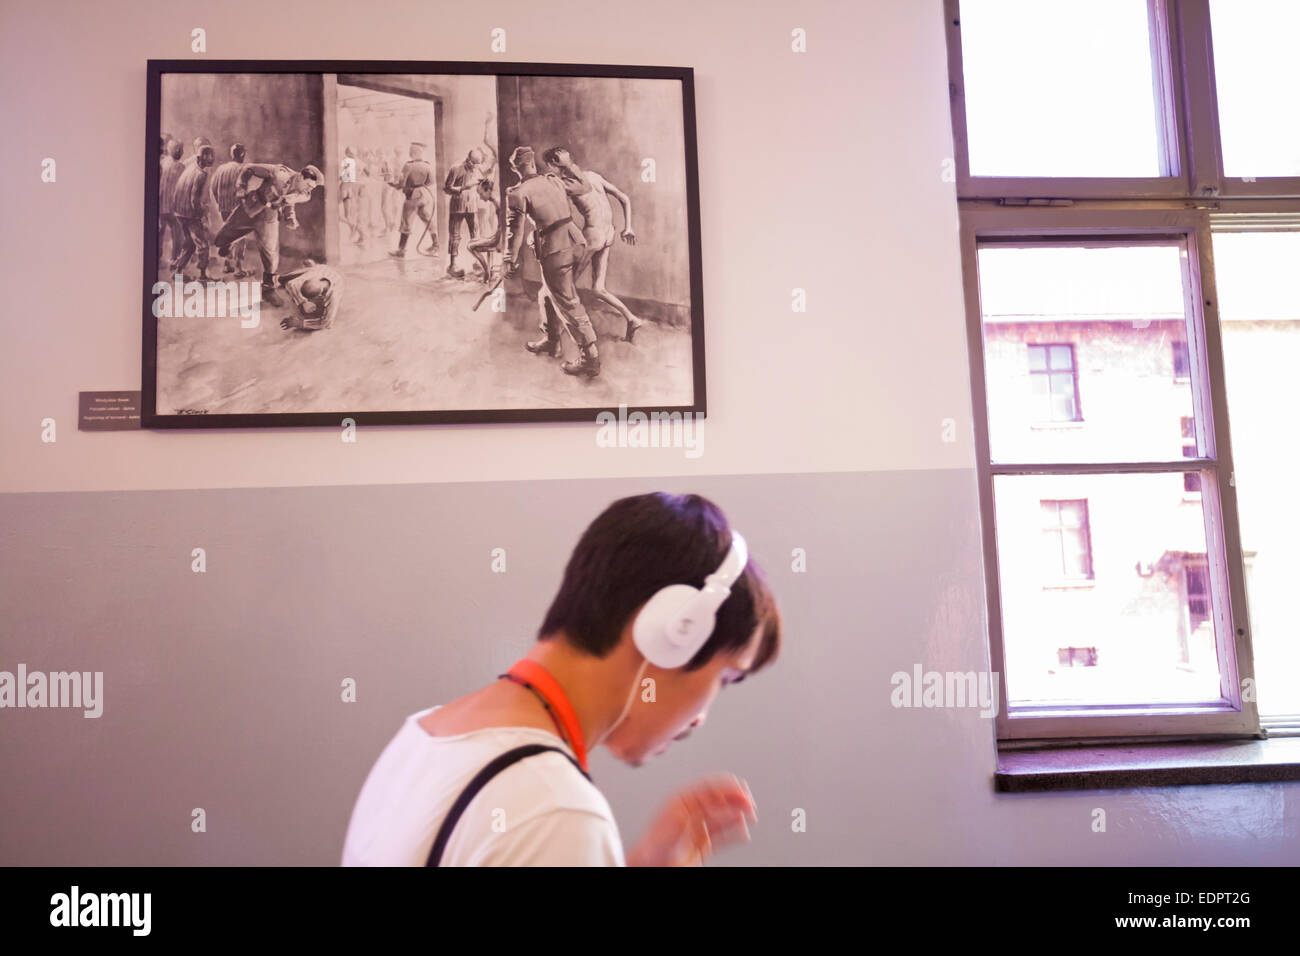 Visitor hurrying past picture on wall of Beginning of torment baths inside the Auschwitz concentration camp, Auschwitz, Poland Stock Photo